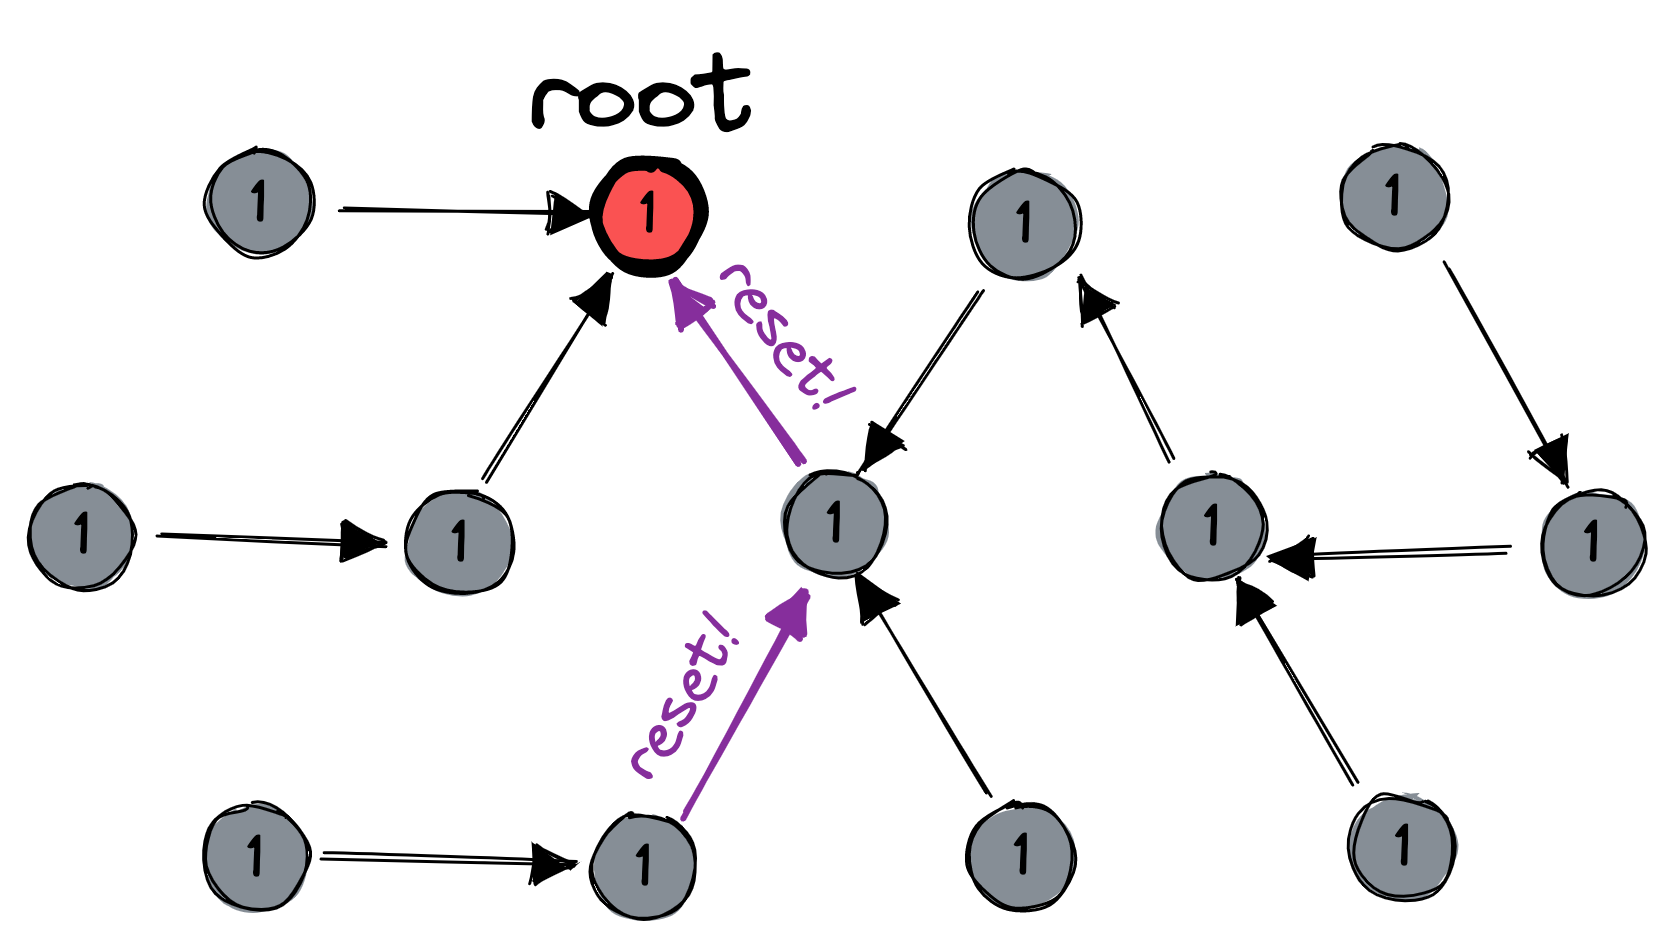 One of the nodes says “reset” to its parent, which says “reset” to its parent, which is the root. All nodes are still labeled “one”.